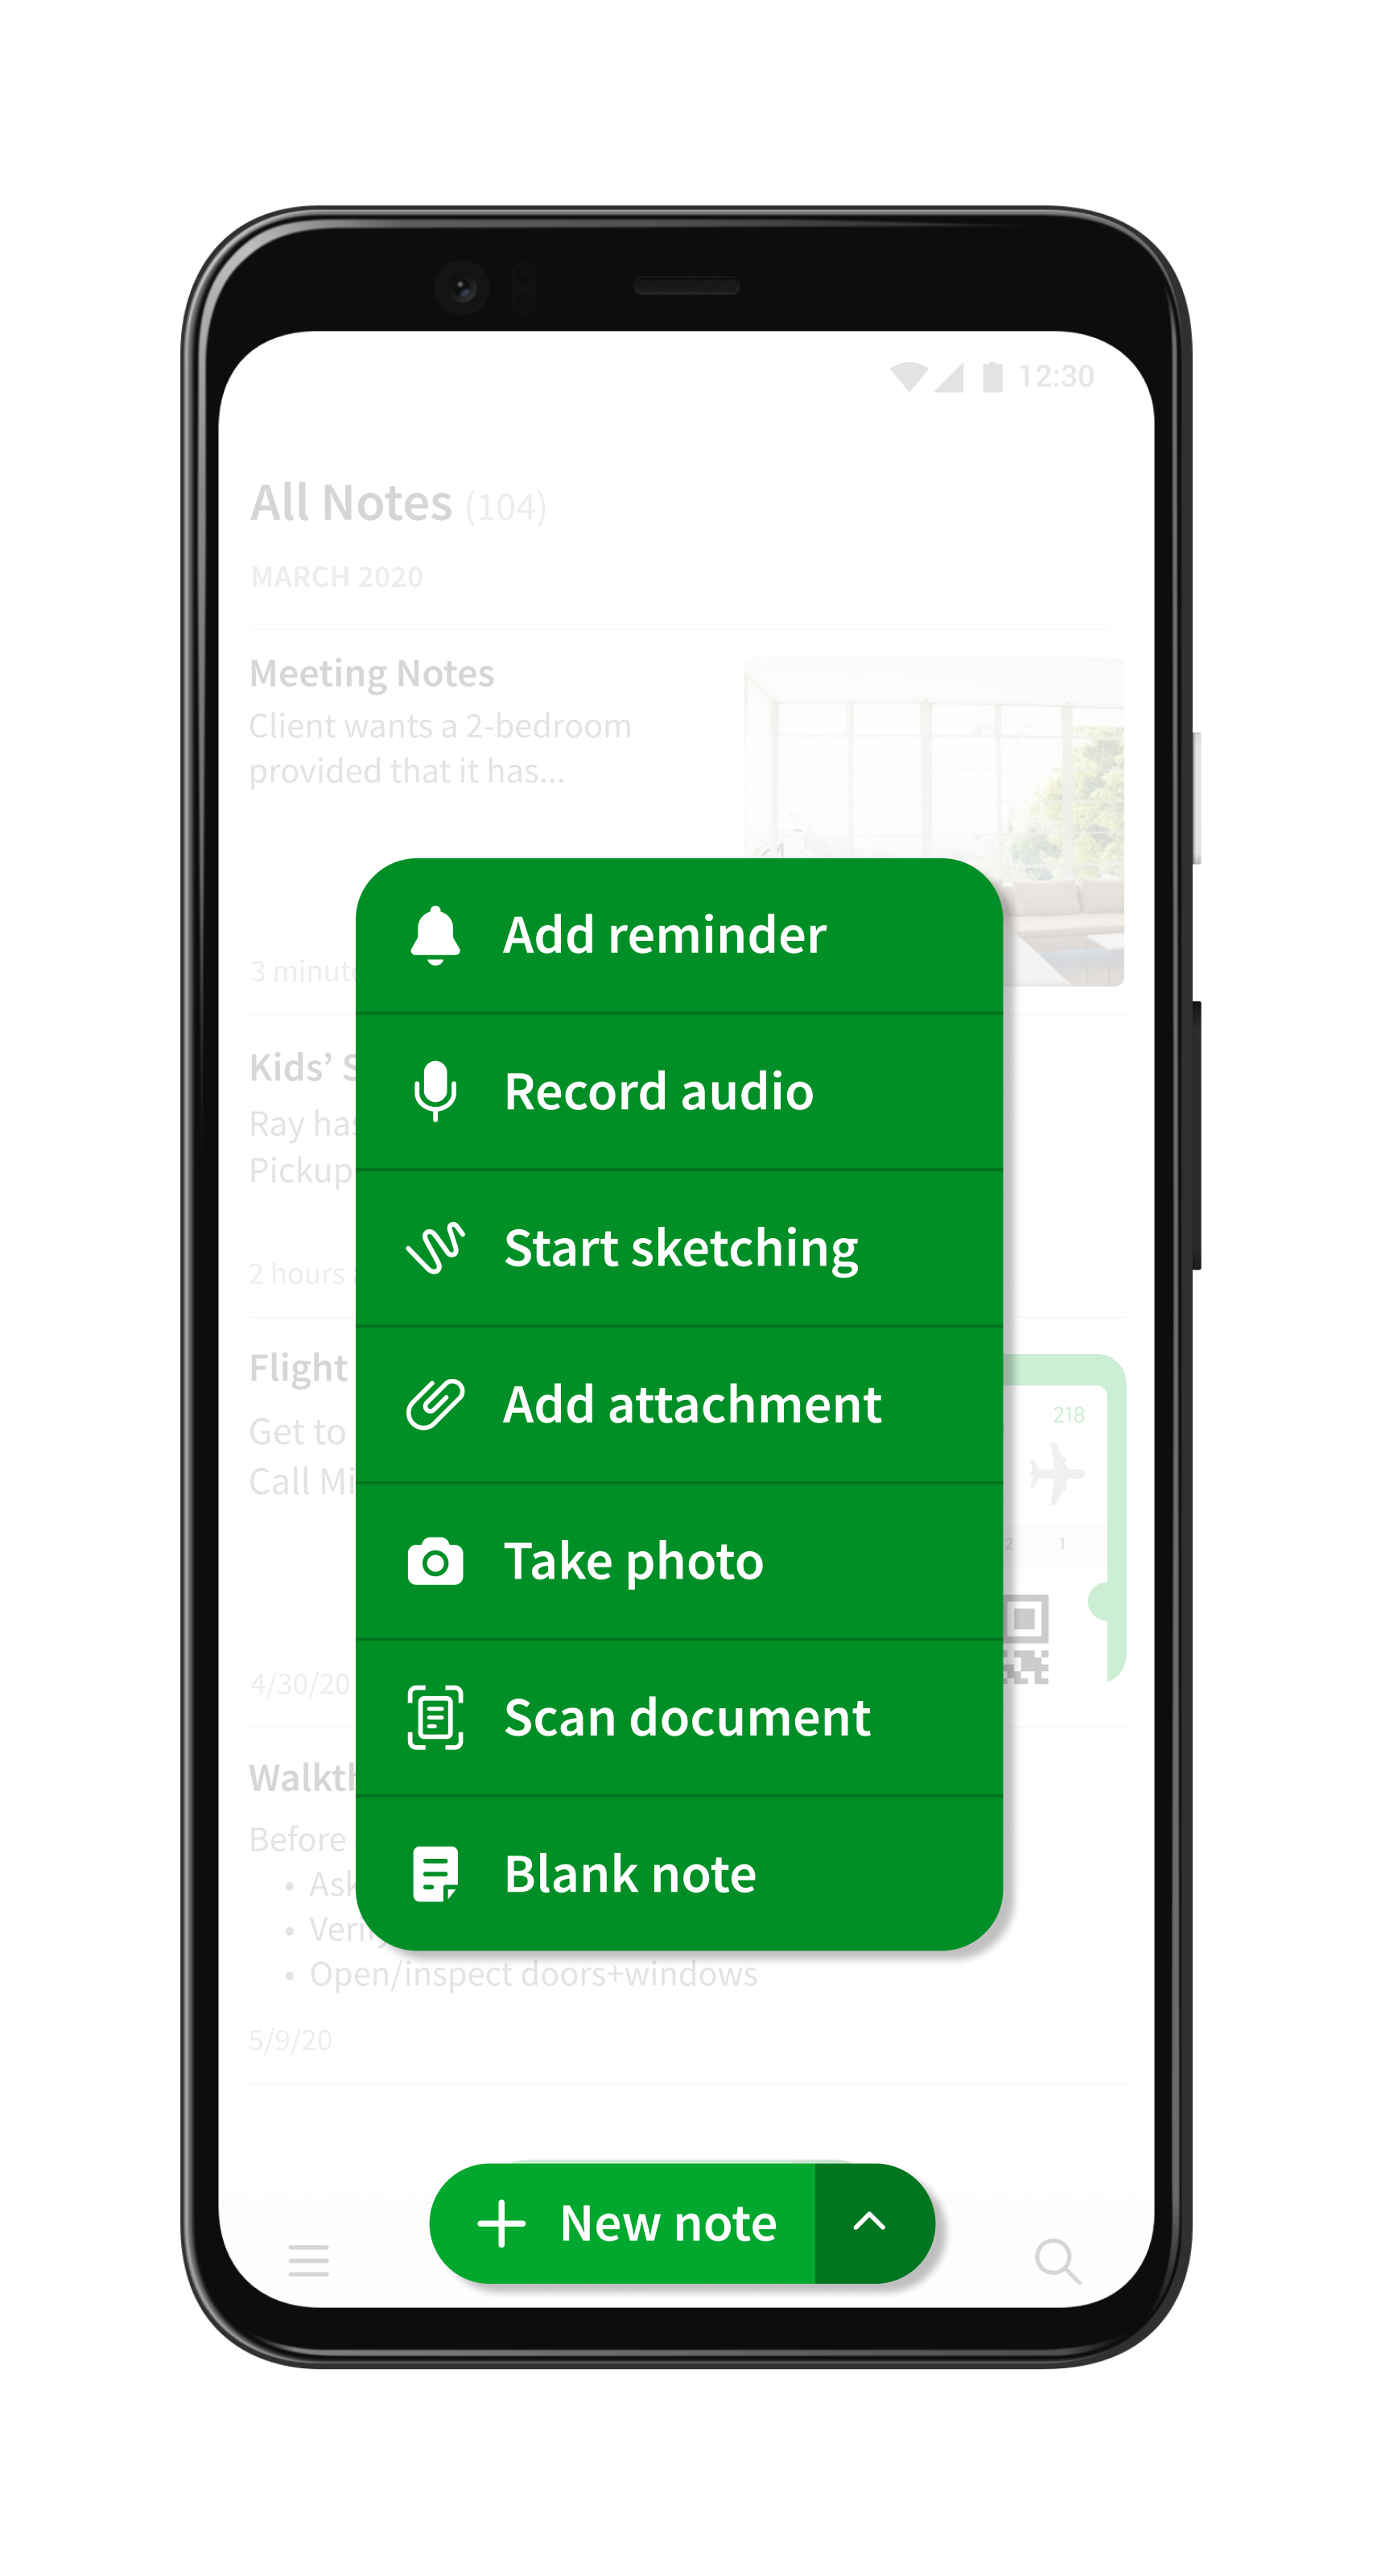 The new 'New note' button in Evernote for Android